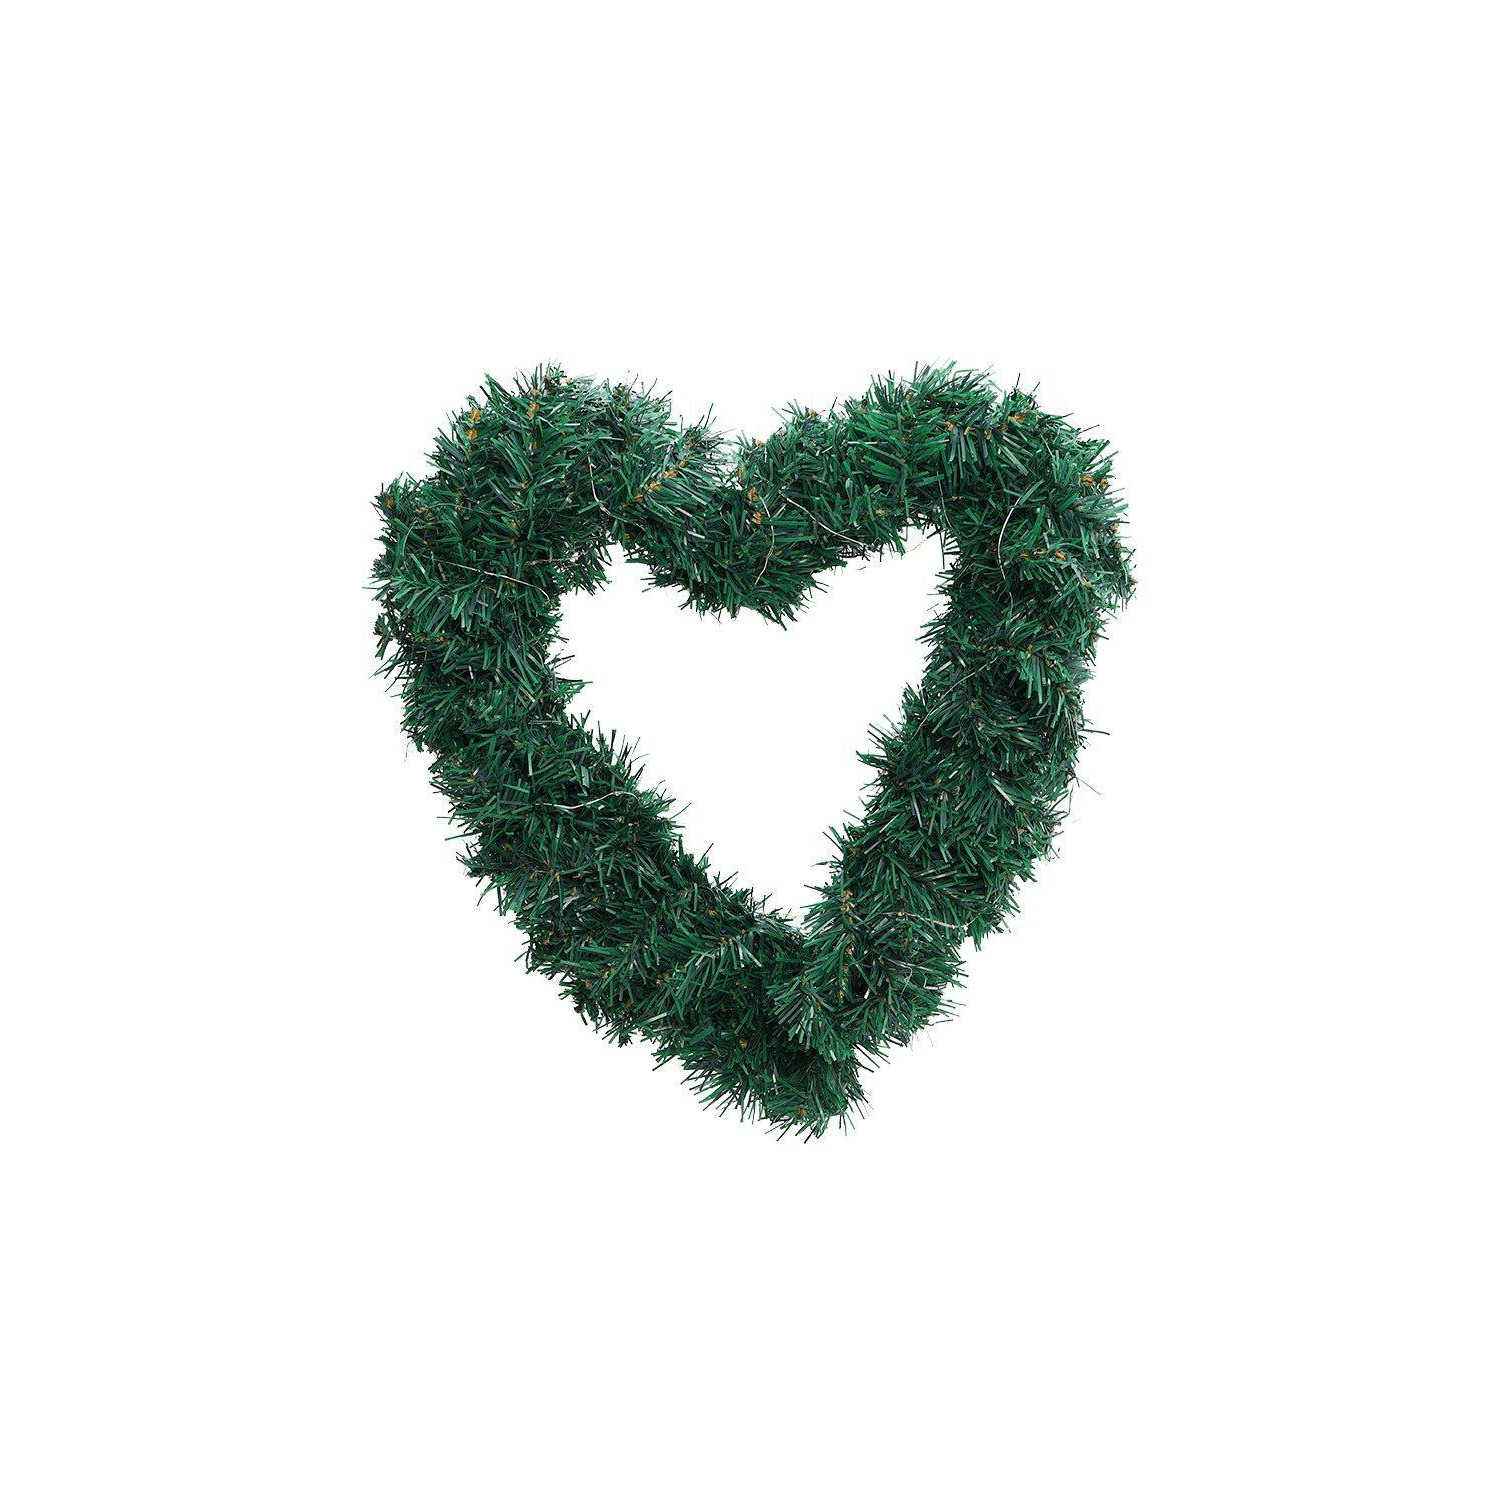 Artificial Heart-shaped Door Hanging Garland Christmas Decoration with Light String - image 1